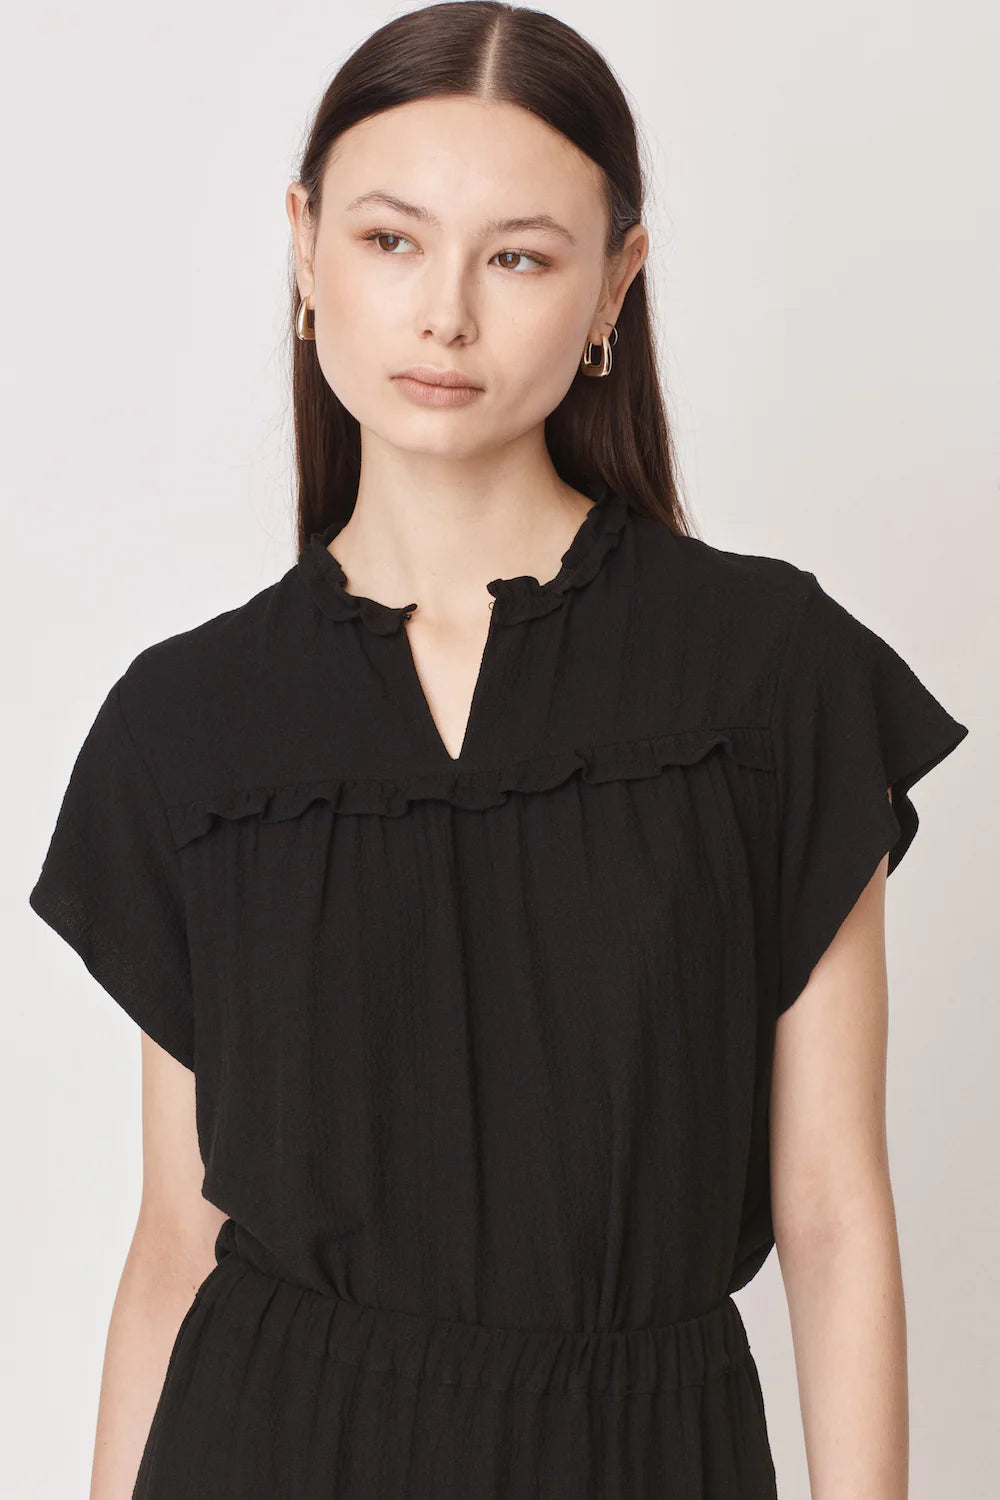 Short sleeved black top with notch neck and ruffle detail in a textured fabric